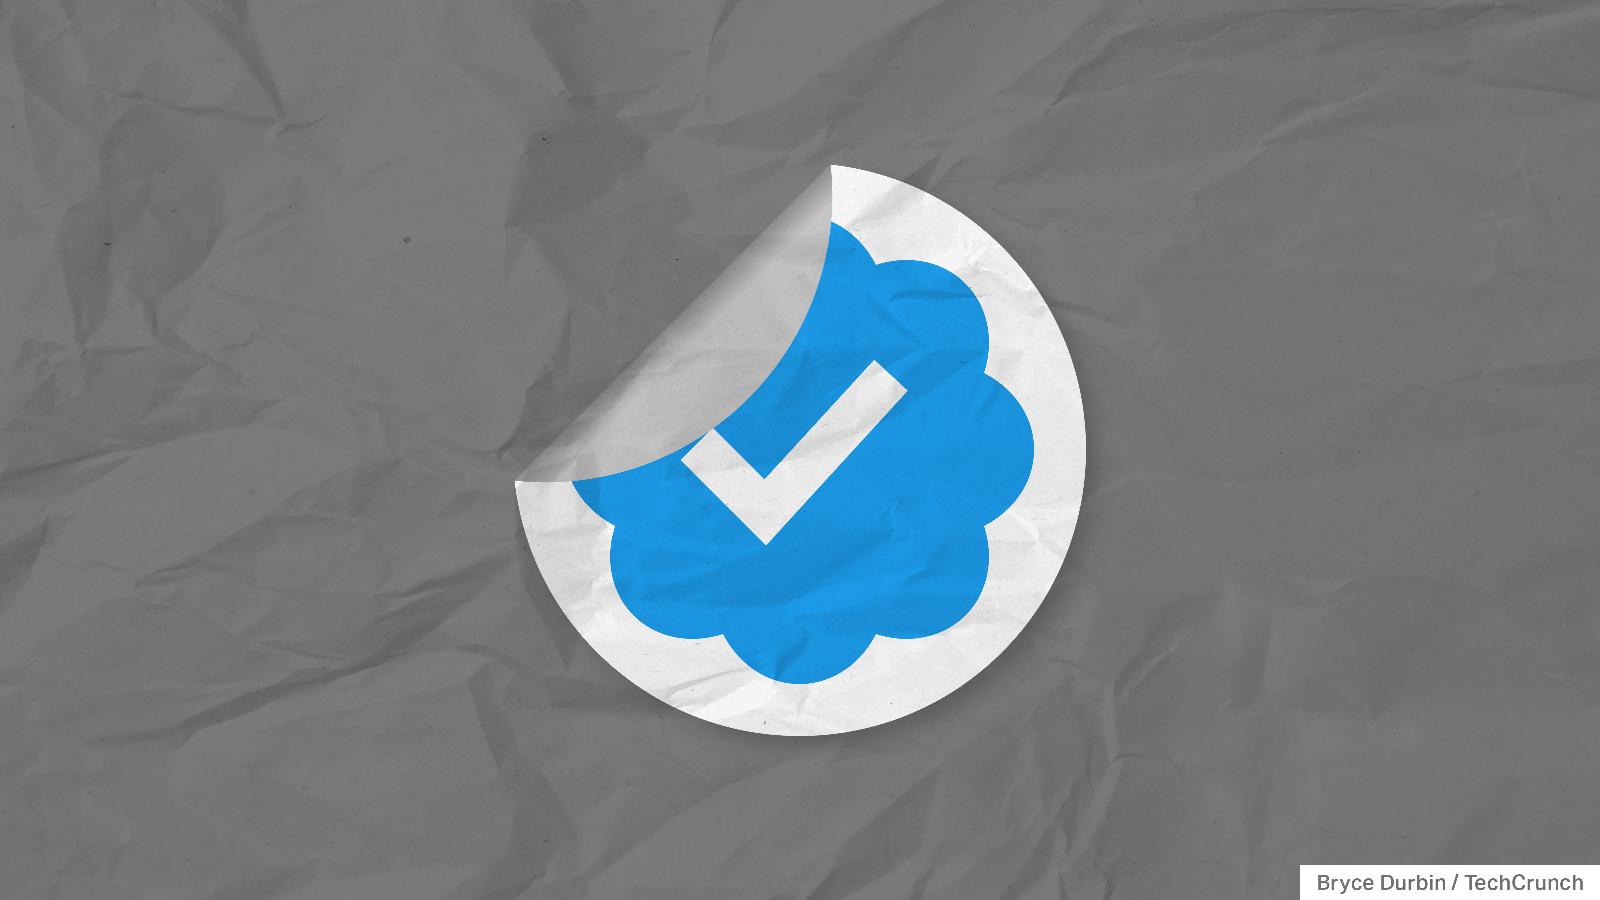 Twitter’s legacy blue checkmark era is officially over